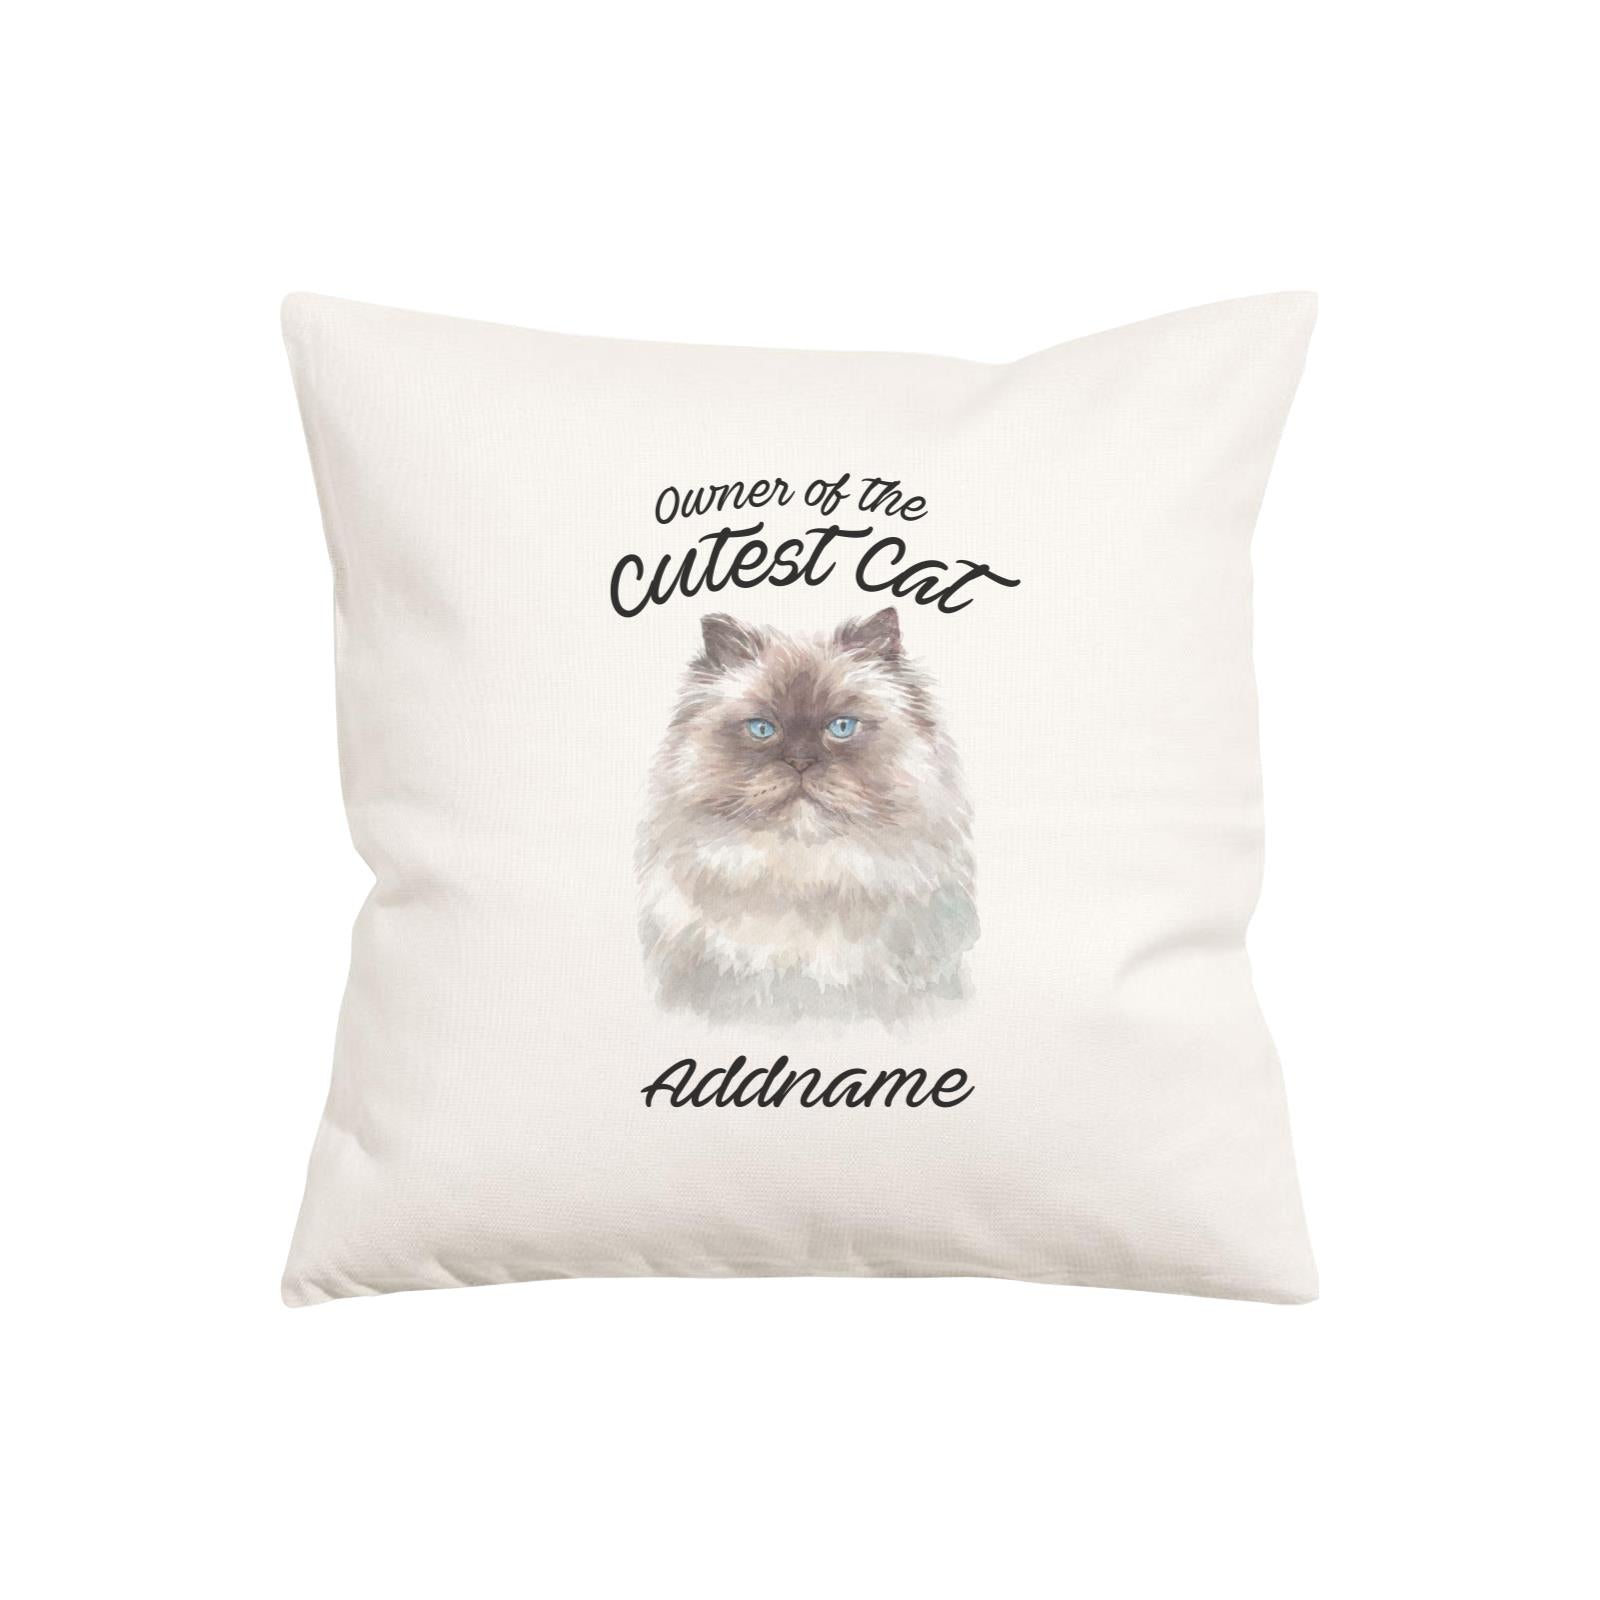 Watercolor Owner Of The Cutest Cat Himalayan White Addname Pillow Cushion